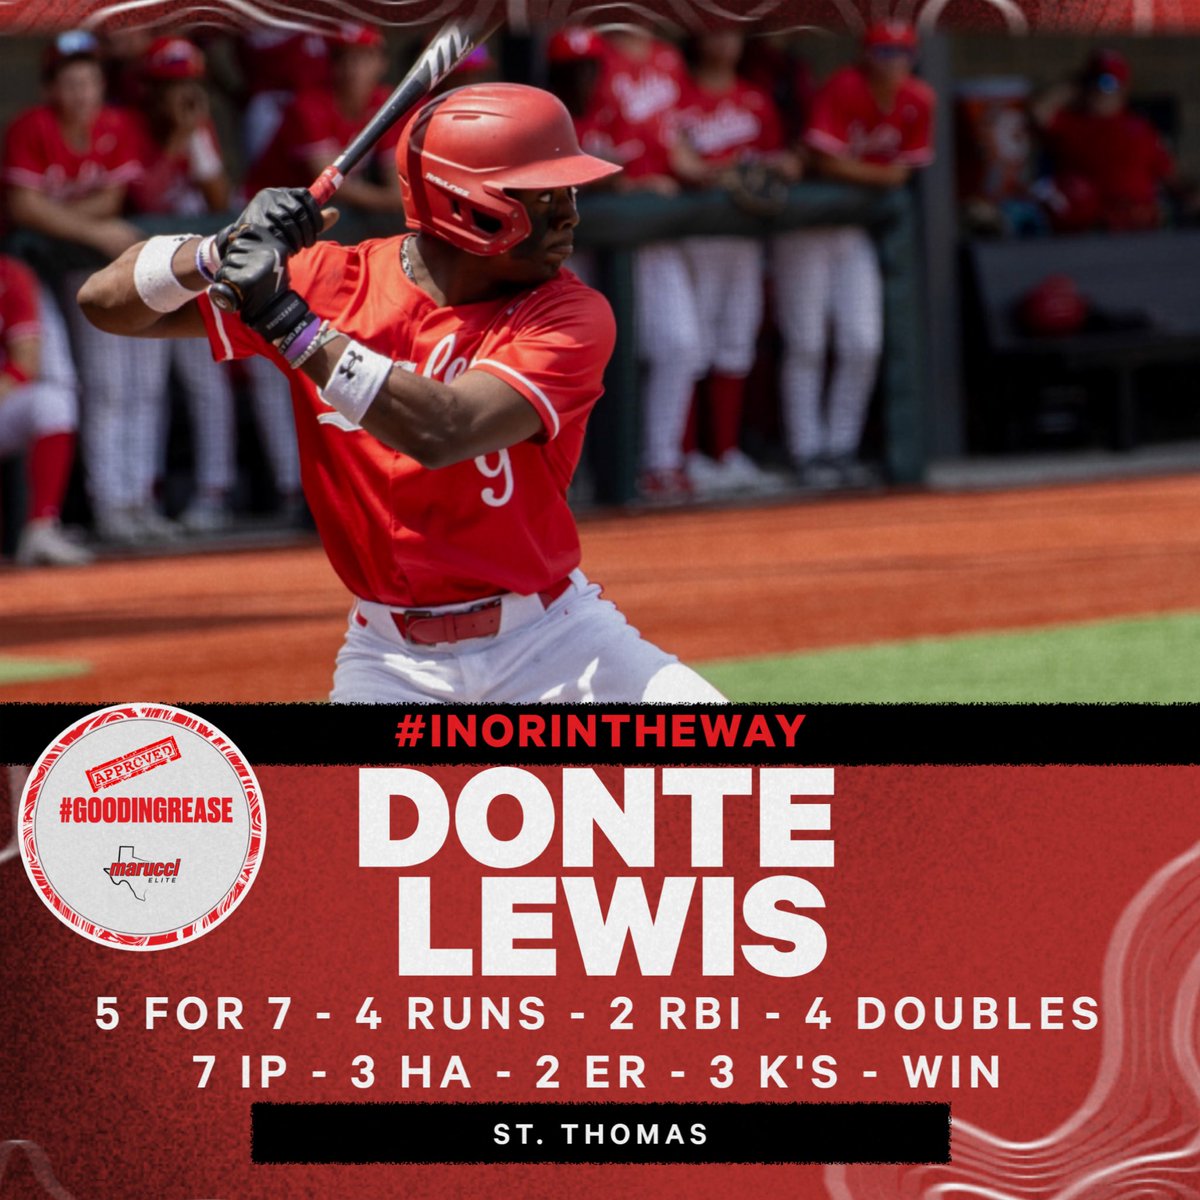 Mr. Do it All did it all again in round 1 of the TAPPS playoffs. 2024 @KStateBSB signee @DonteLewis18 delivered a number of clutch hits in both games and took the bump in game two and threw a complete game to help St Thomas advance to round 2! #GoodInGrease approved ✅…